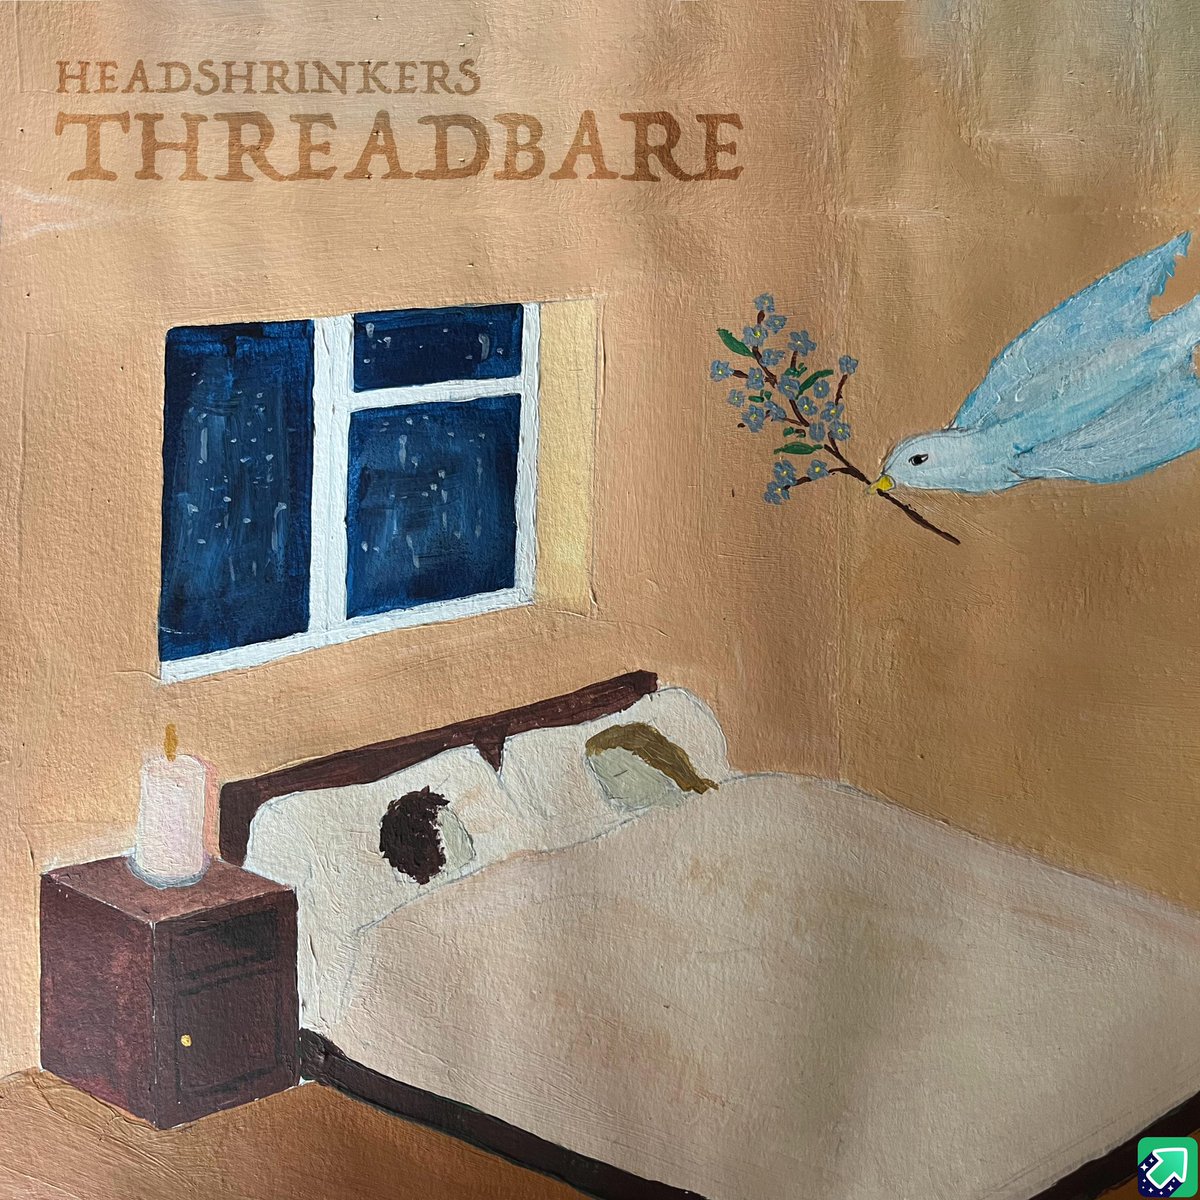 New Single Threadbare - Out 29/03! This one means a lot to us and it’s been a long time coming for sure. You can pre-save it on Spotify now using the link below so that it’s sitting right there in your library on Friday! 🕊️ The music video will be out shortly after on 05/04